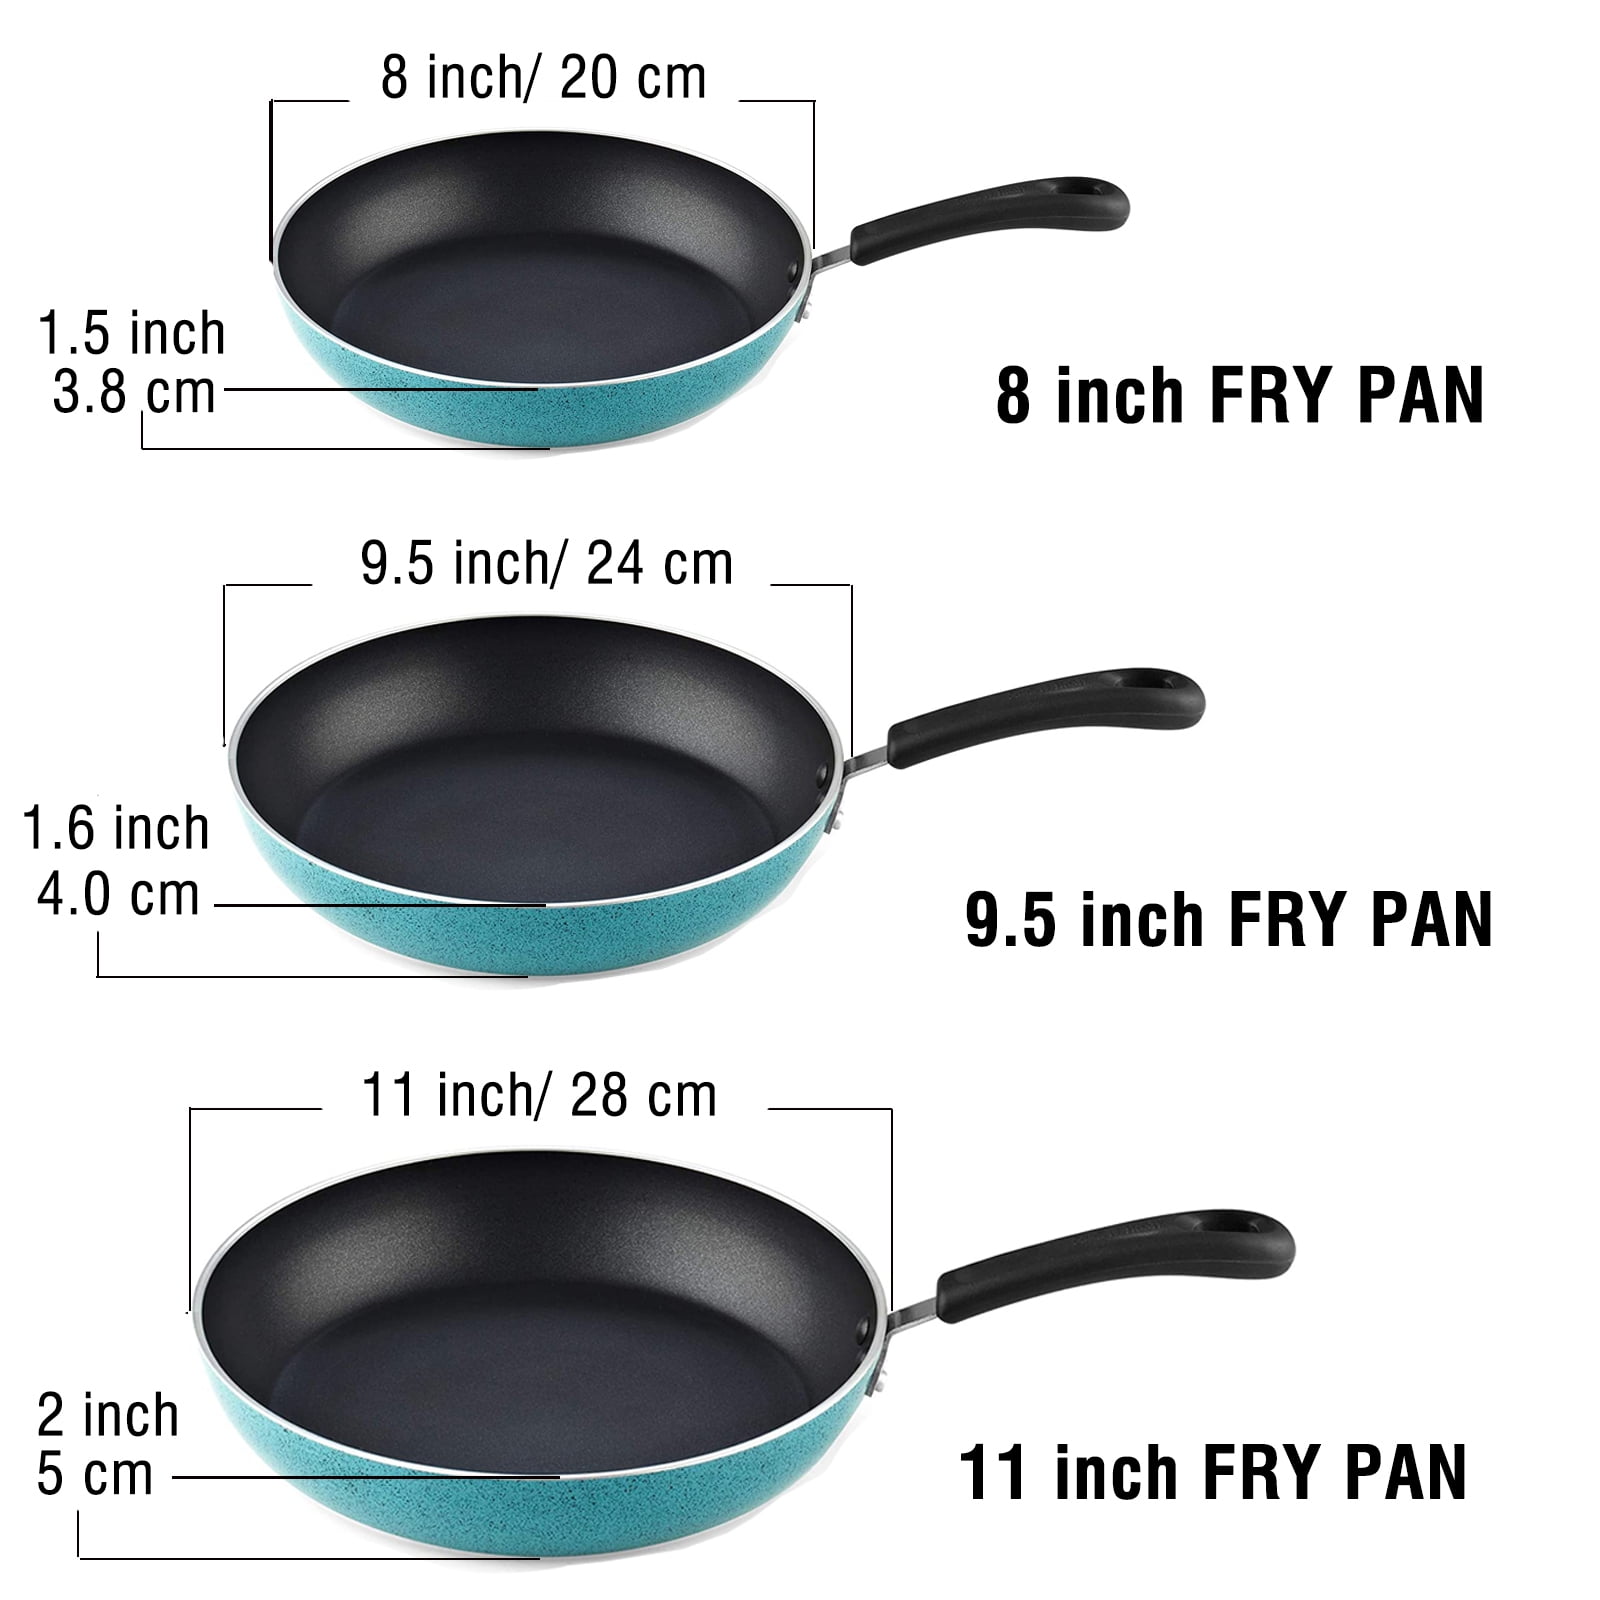 COOKLOVER Nonstick Saute Pan 100% PFOA Free Cookware Induction Skillet Stir Fry Pan with Lid 9.5 inch - White